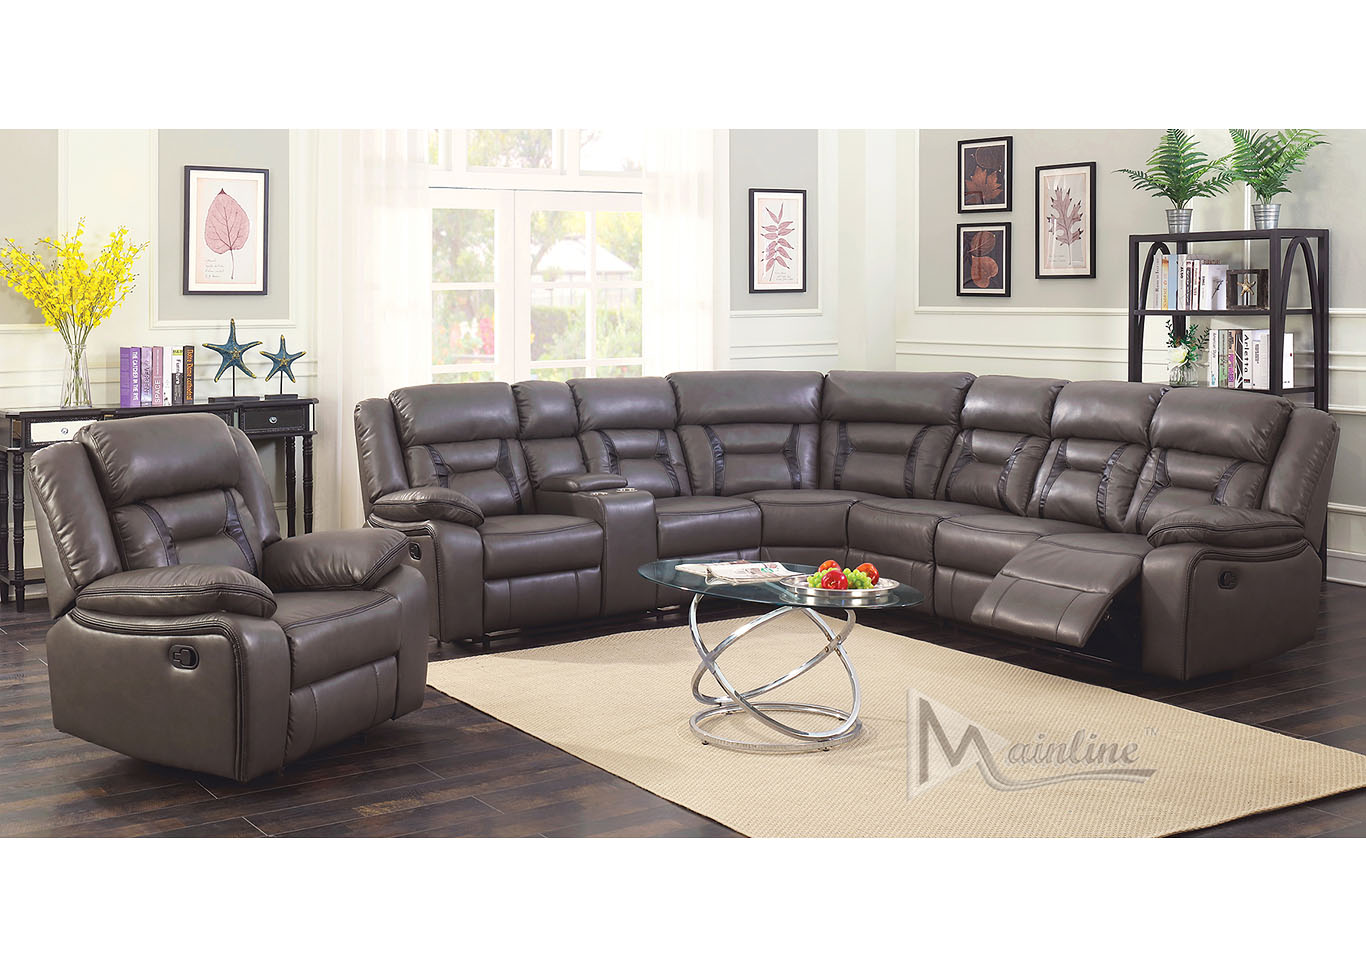 Gray 4-Piece Cha-Cha Motion Sectional,Mainline